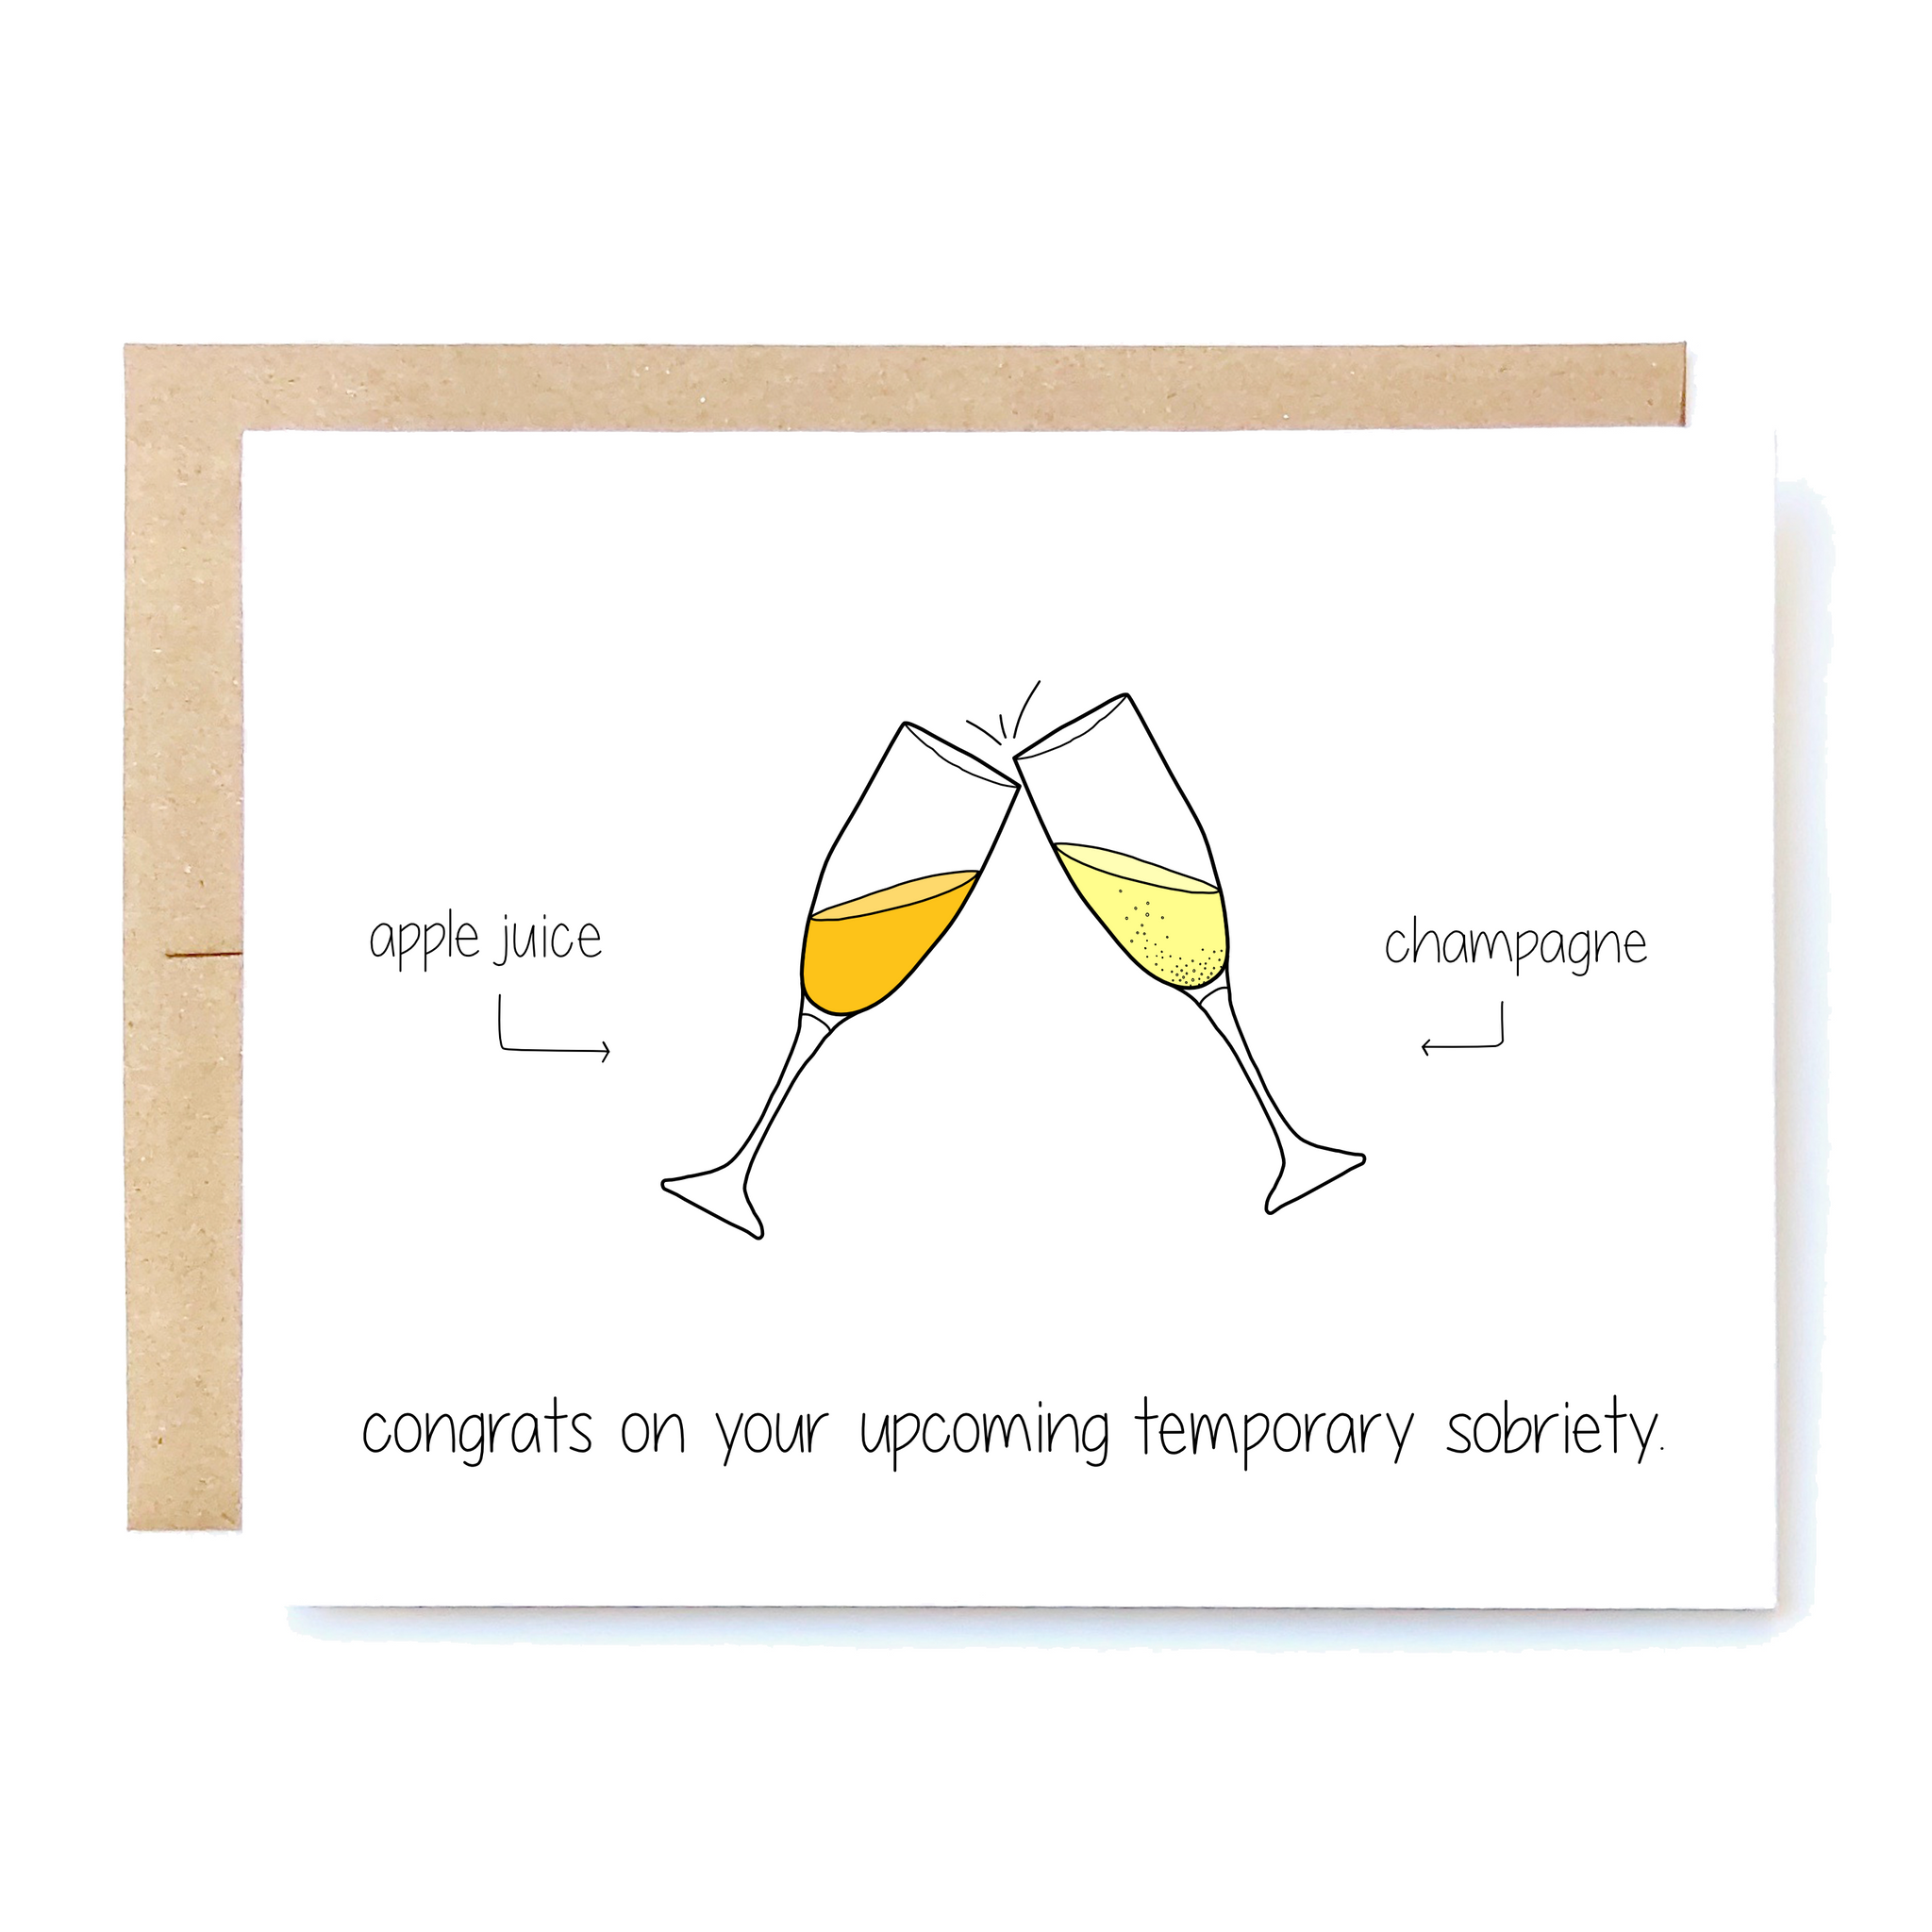 Card Front: Congrats on your upcoming temporary sobriety.